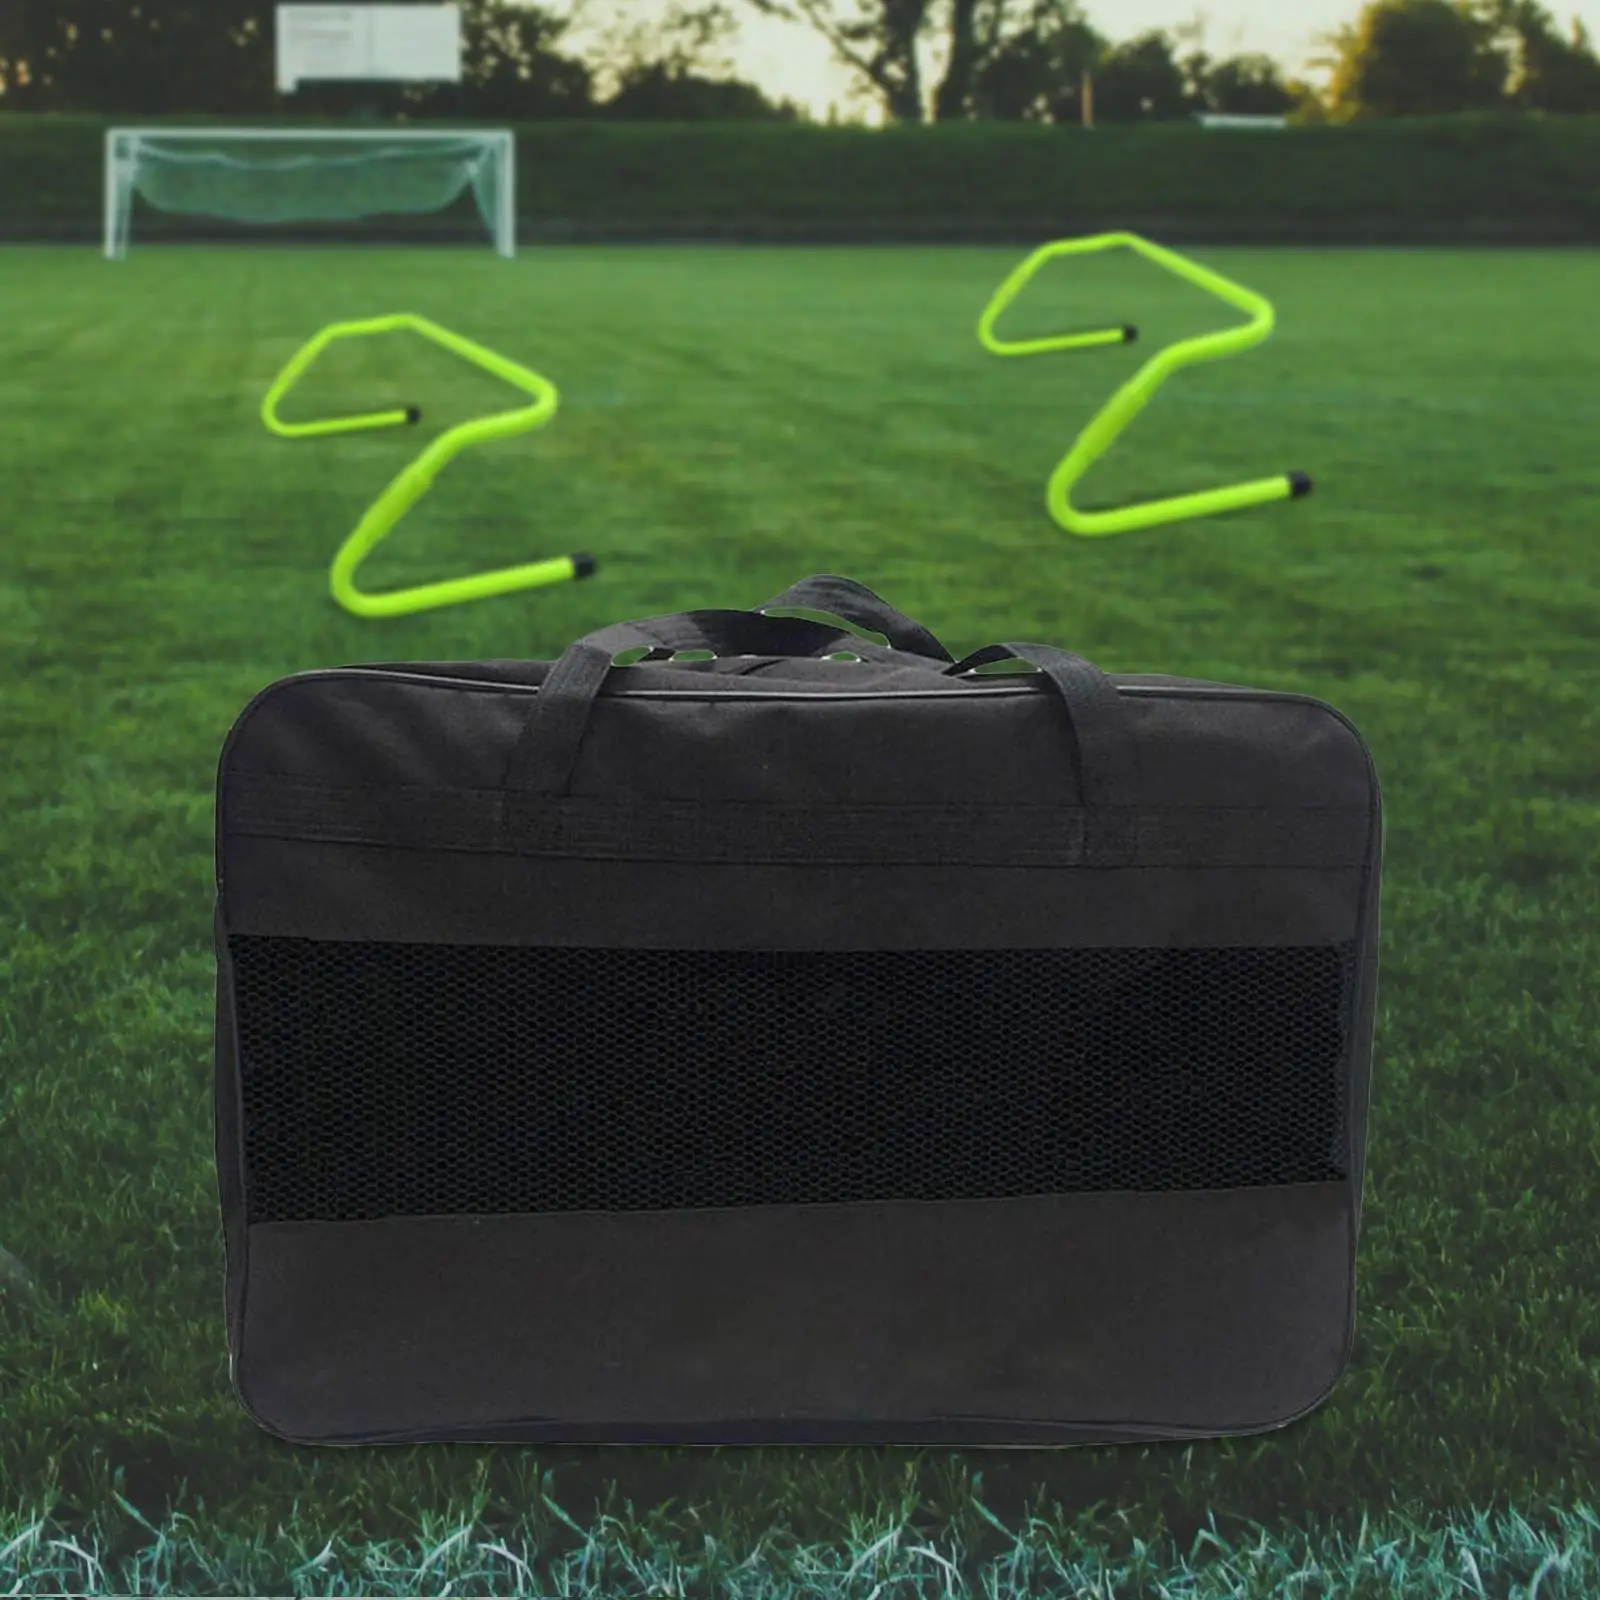 

Hurdle Carry Bag Black Breathable Hurdles Not Included with Zipper Speed Hurdle Storage Bag Handbag for Soccer Training Carrying